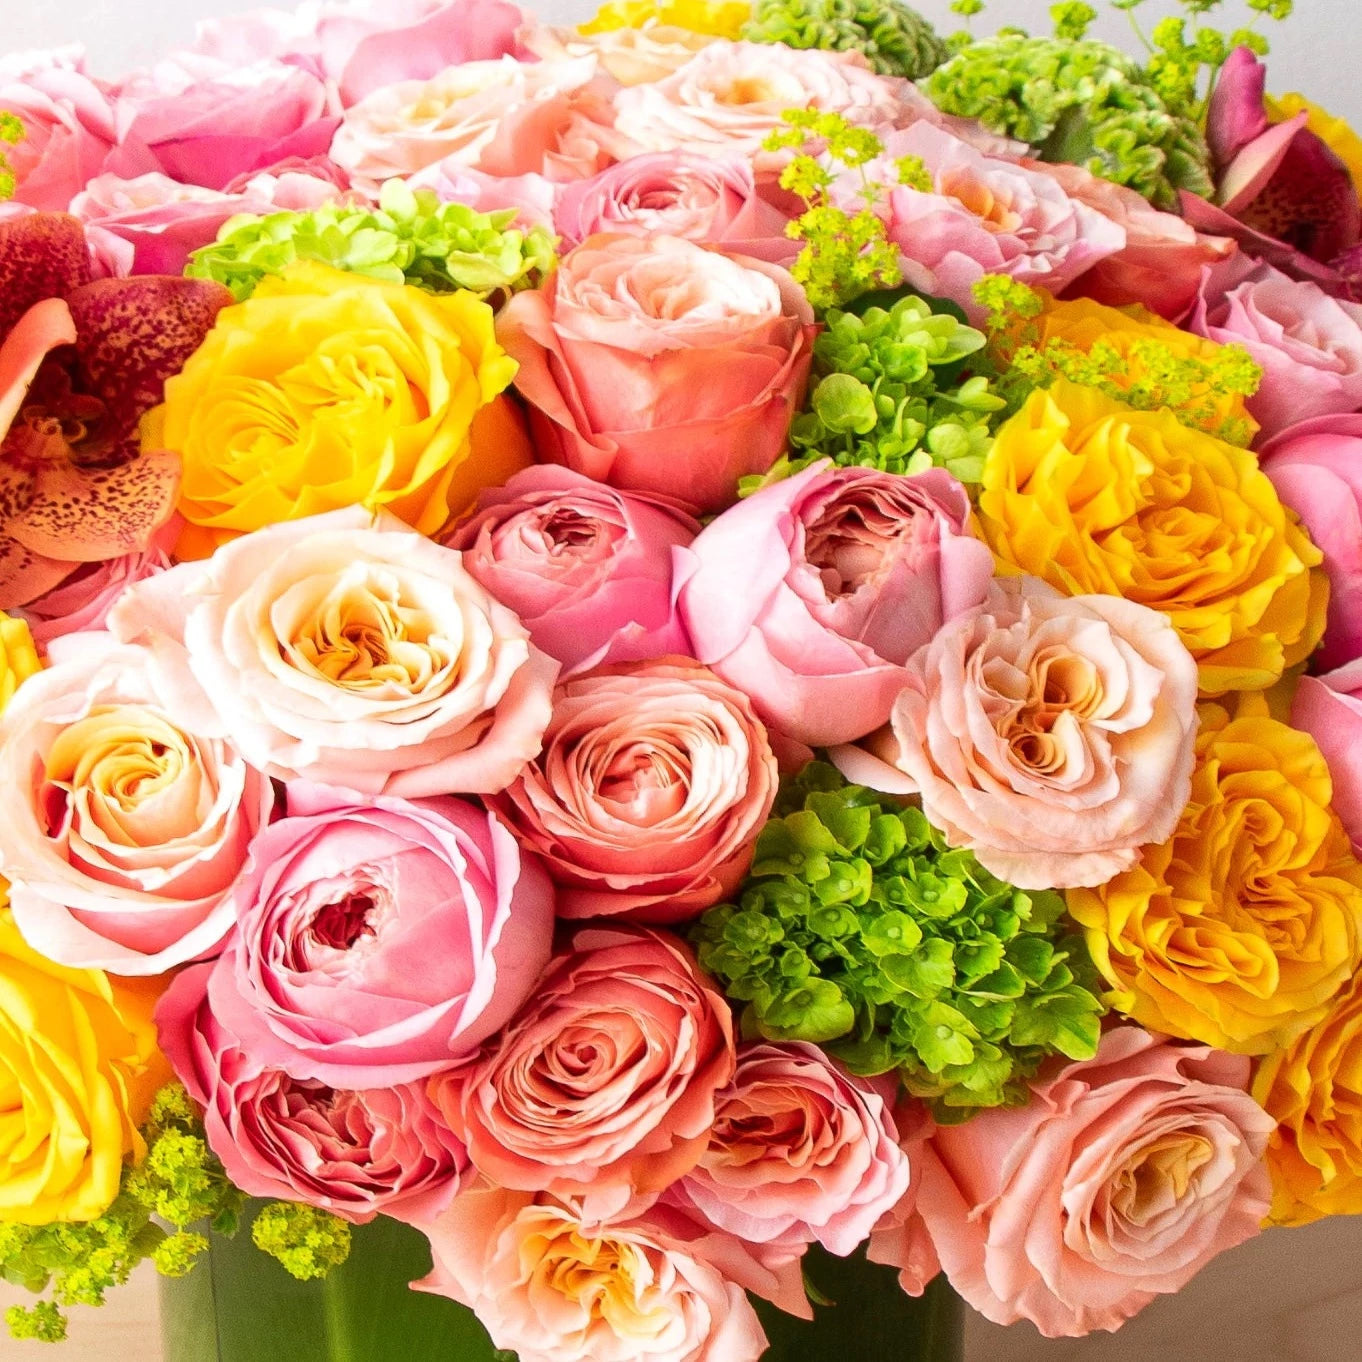 This beautiful bouquet is made up of unique garden roses that are artfully matched with orchids, hydrangeas, and other summer flowers.